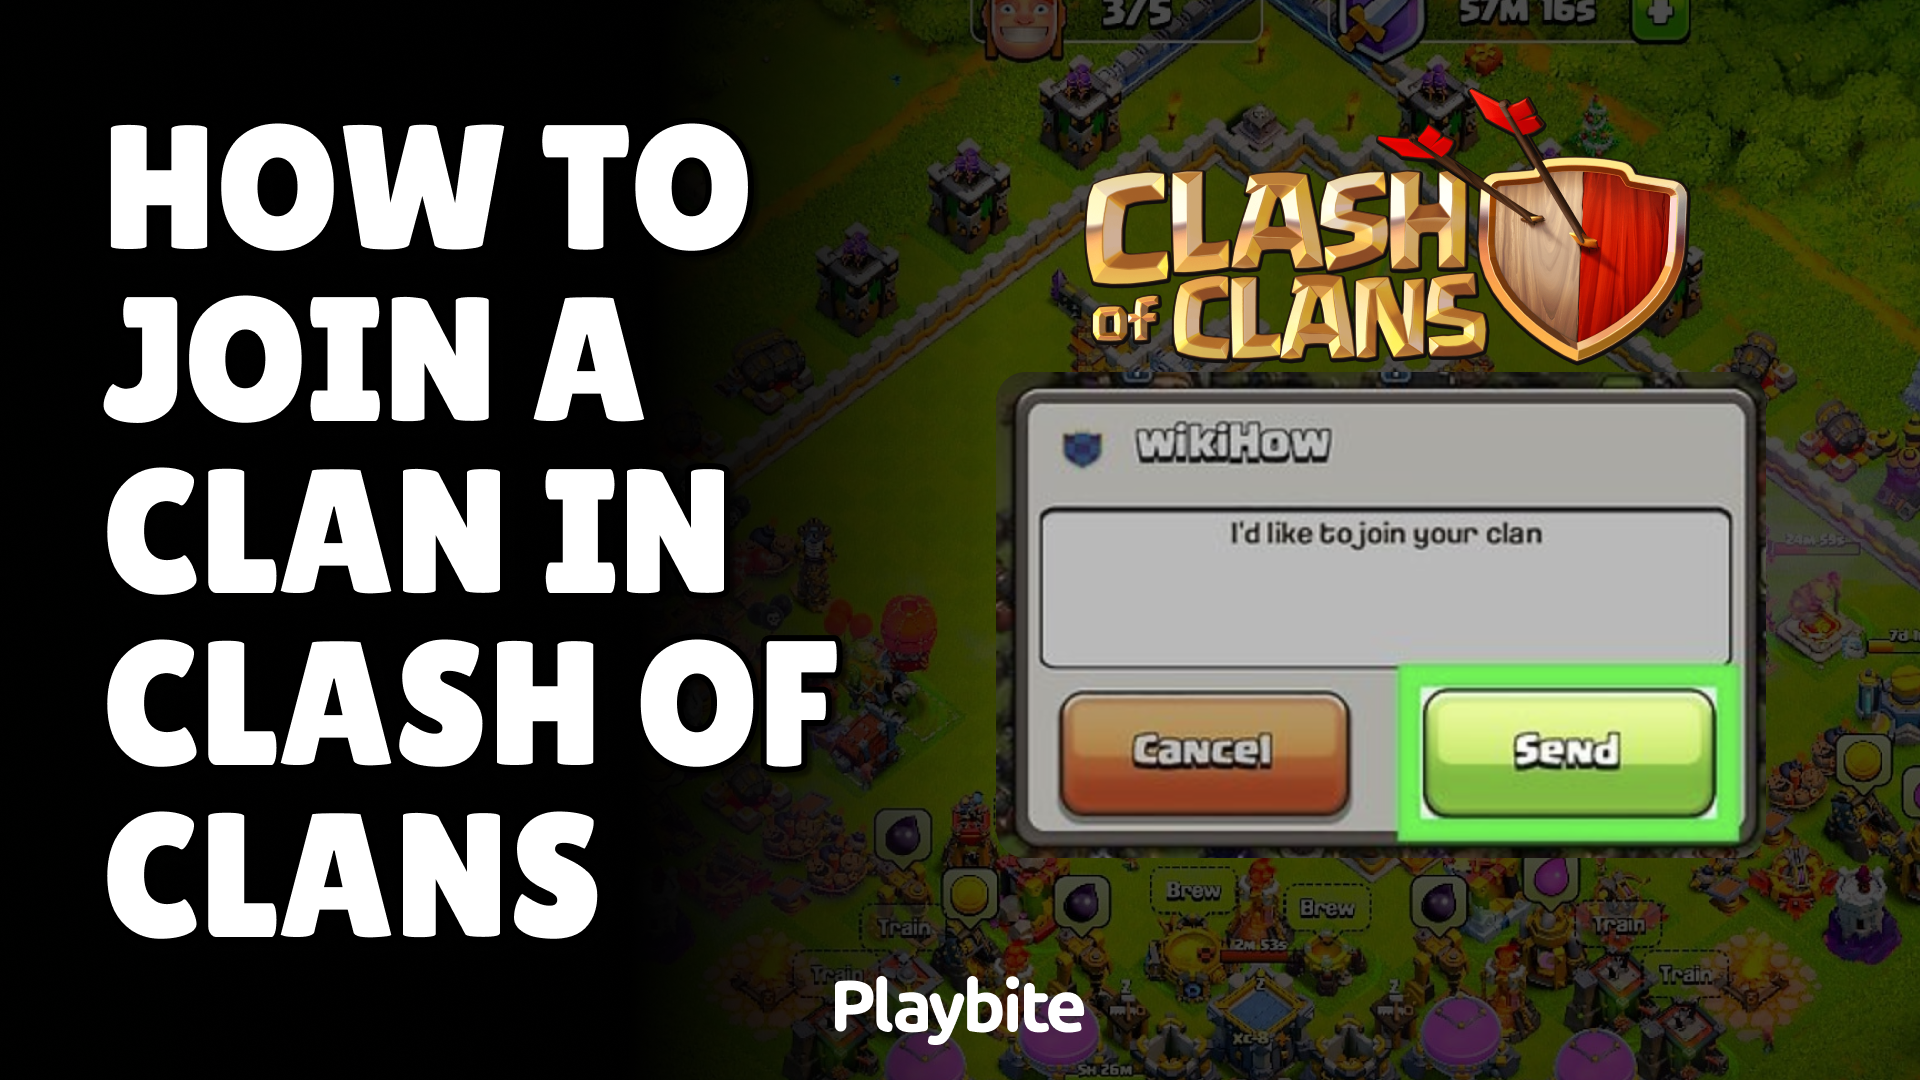 How To Join A Clan In Clash Of Clans